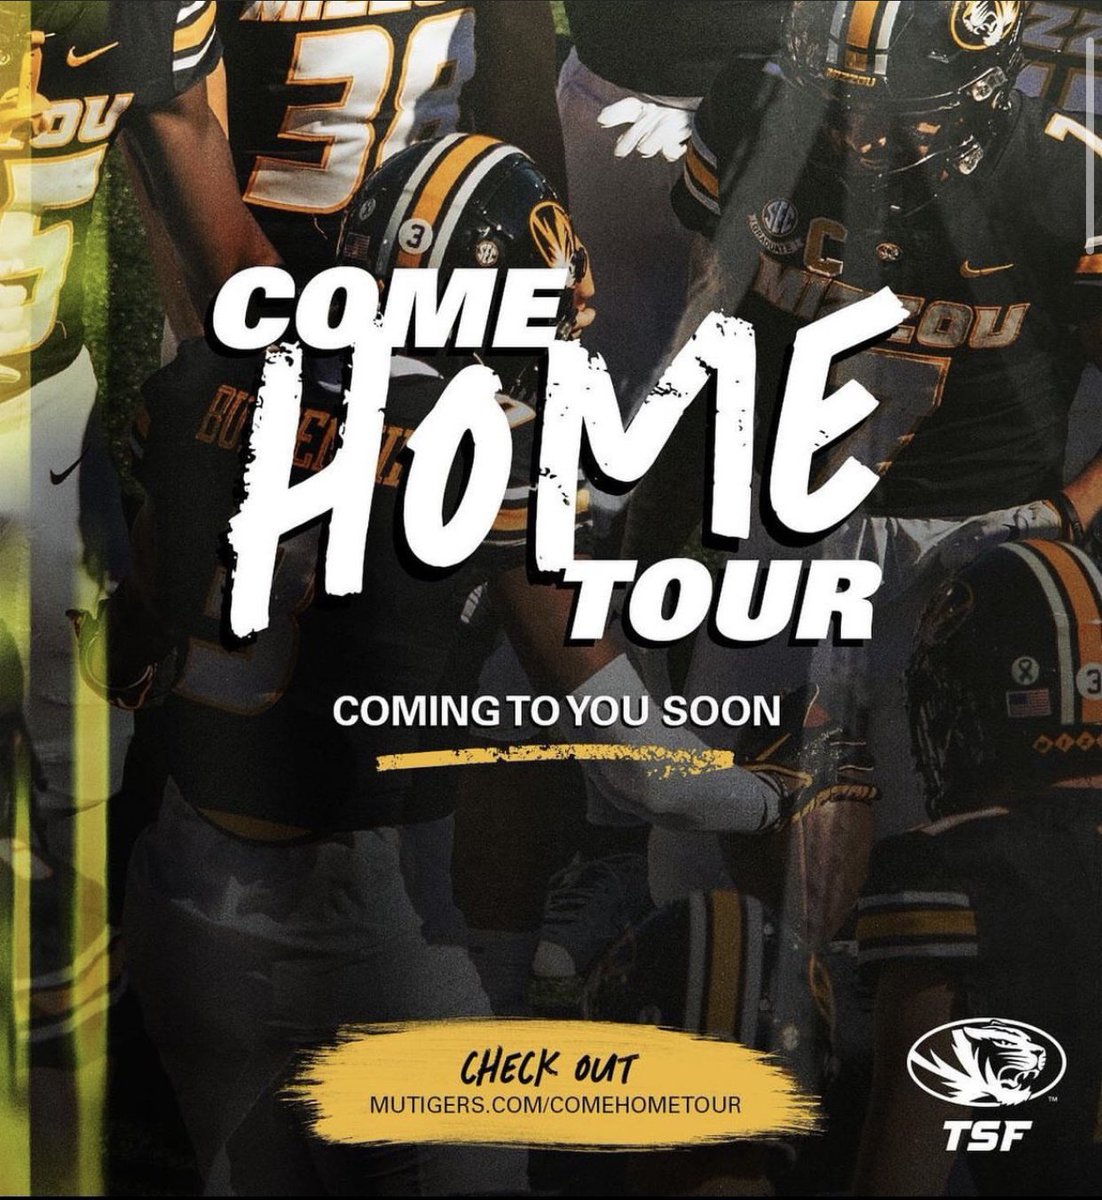 KEEP ON THE LOOKOUT FOR THE COME HOME TOUR 2024, MAKING A STOP NEAR YOU! DON'T MISS YOUR CHANCE TO HANG OUT WITH OTHER TIGER FANS AND MEET MIZZOU COACHES AND ATHLETES! REGISTER AT MUTIGERS.COM/COMEHOMETOUR